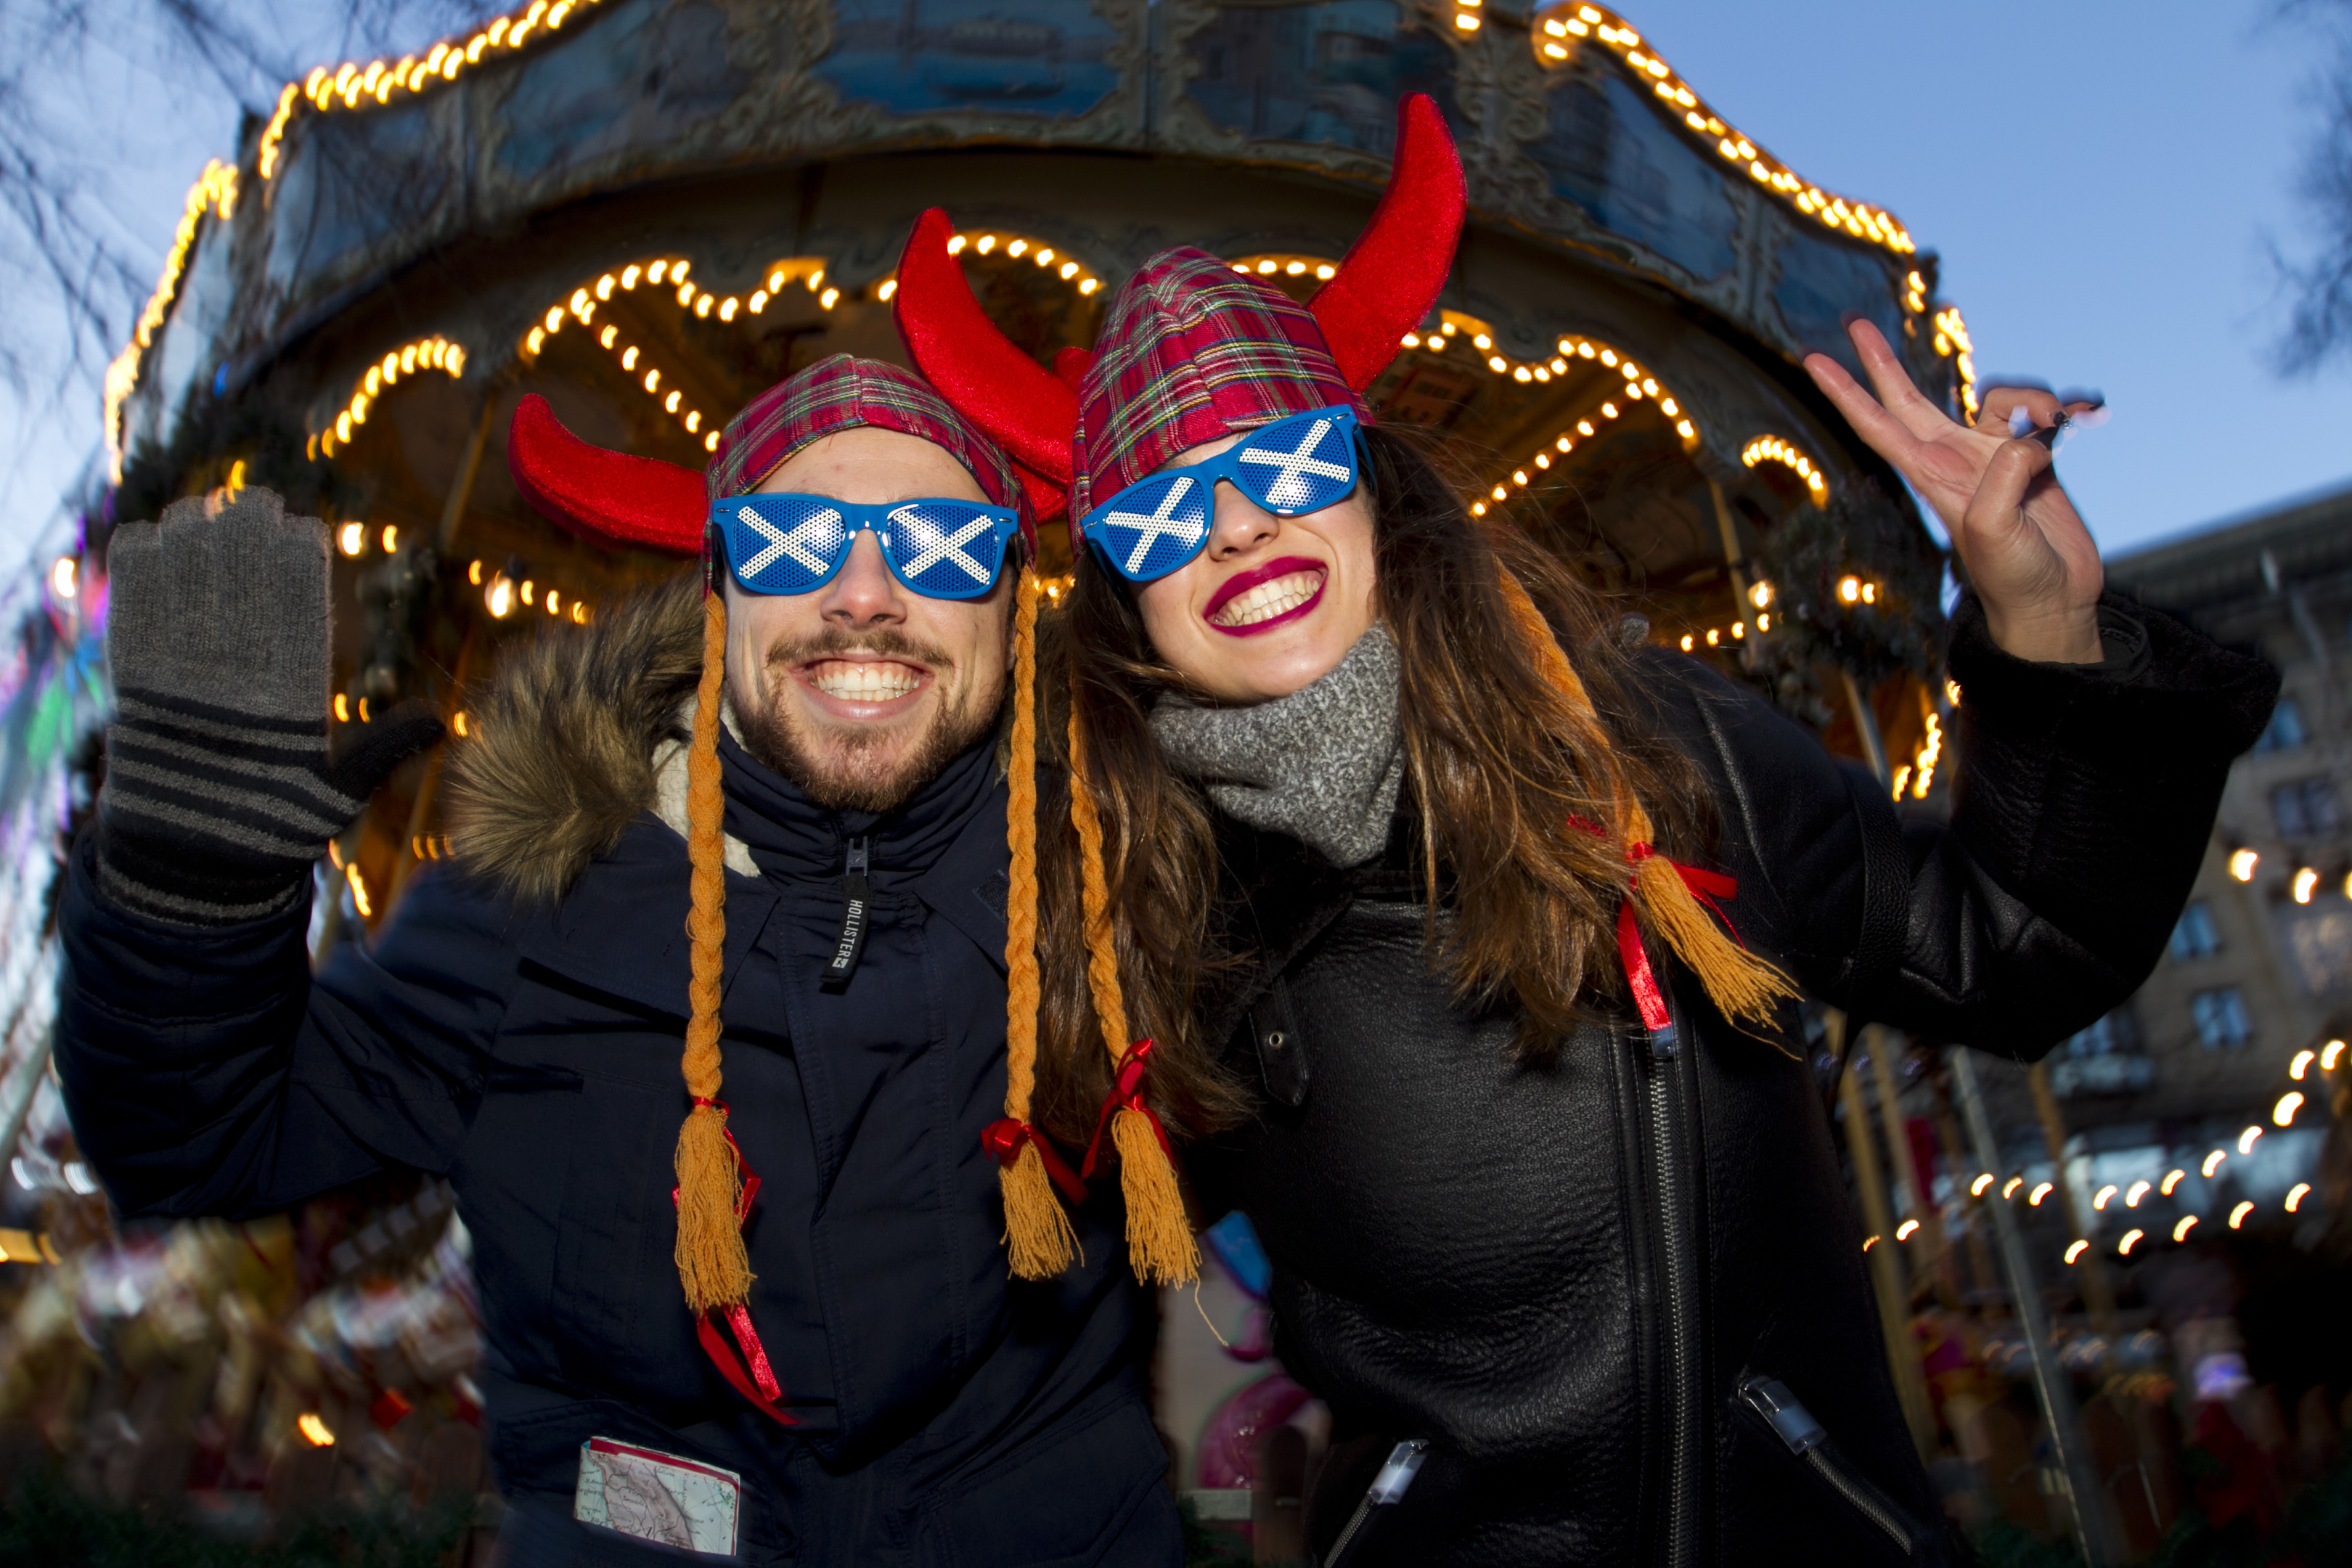 Juanvi Viana (24), and Anabel Garcia (22), from Valencia, Spain, who are looking forward to spending Hogmanay in Edinburgh this year (Andrew Cawley / DC Thomson)